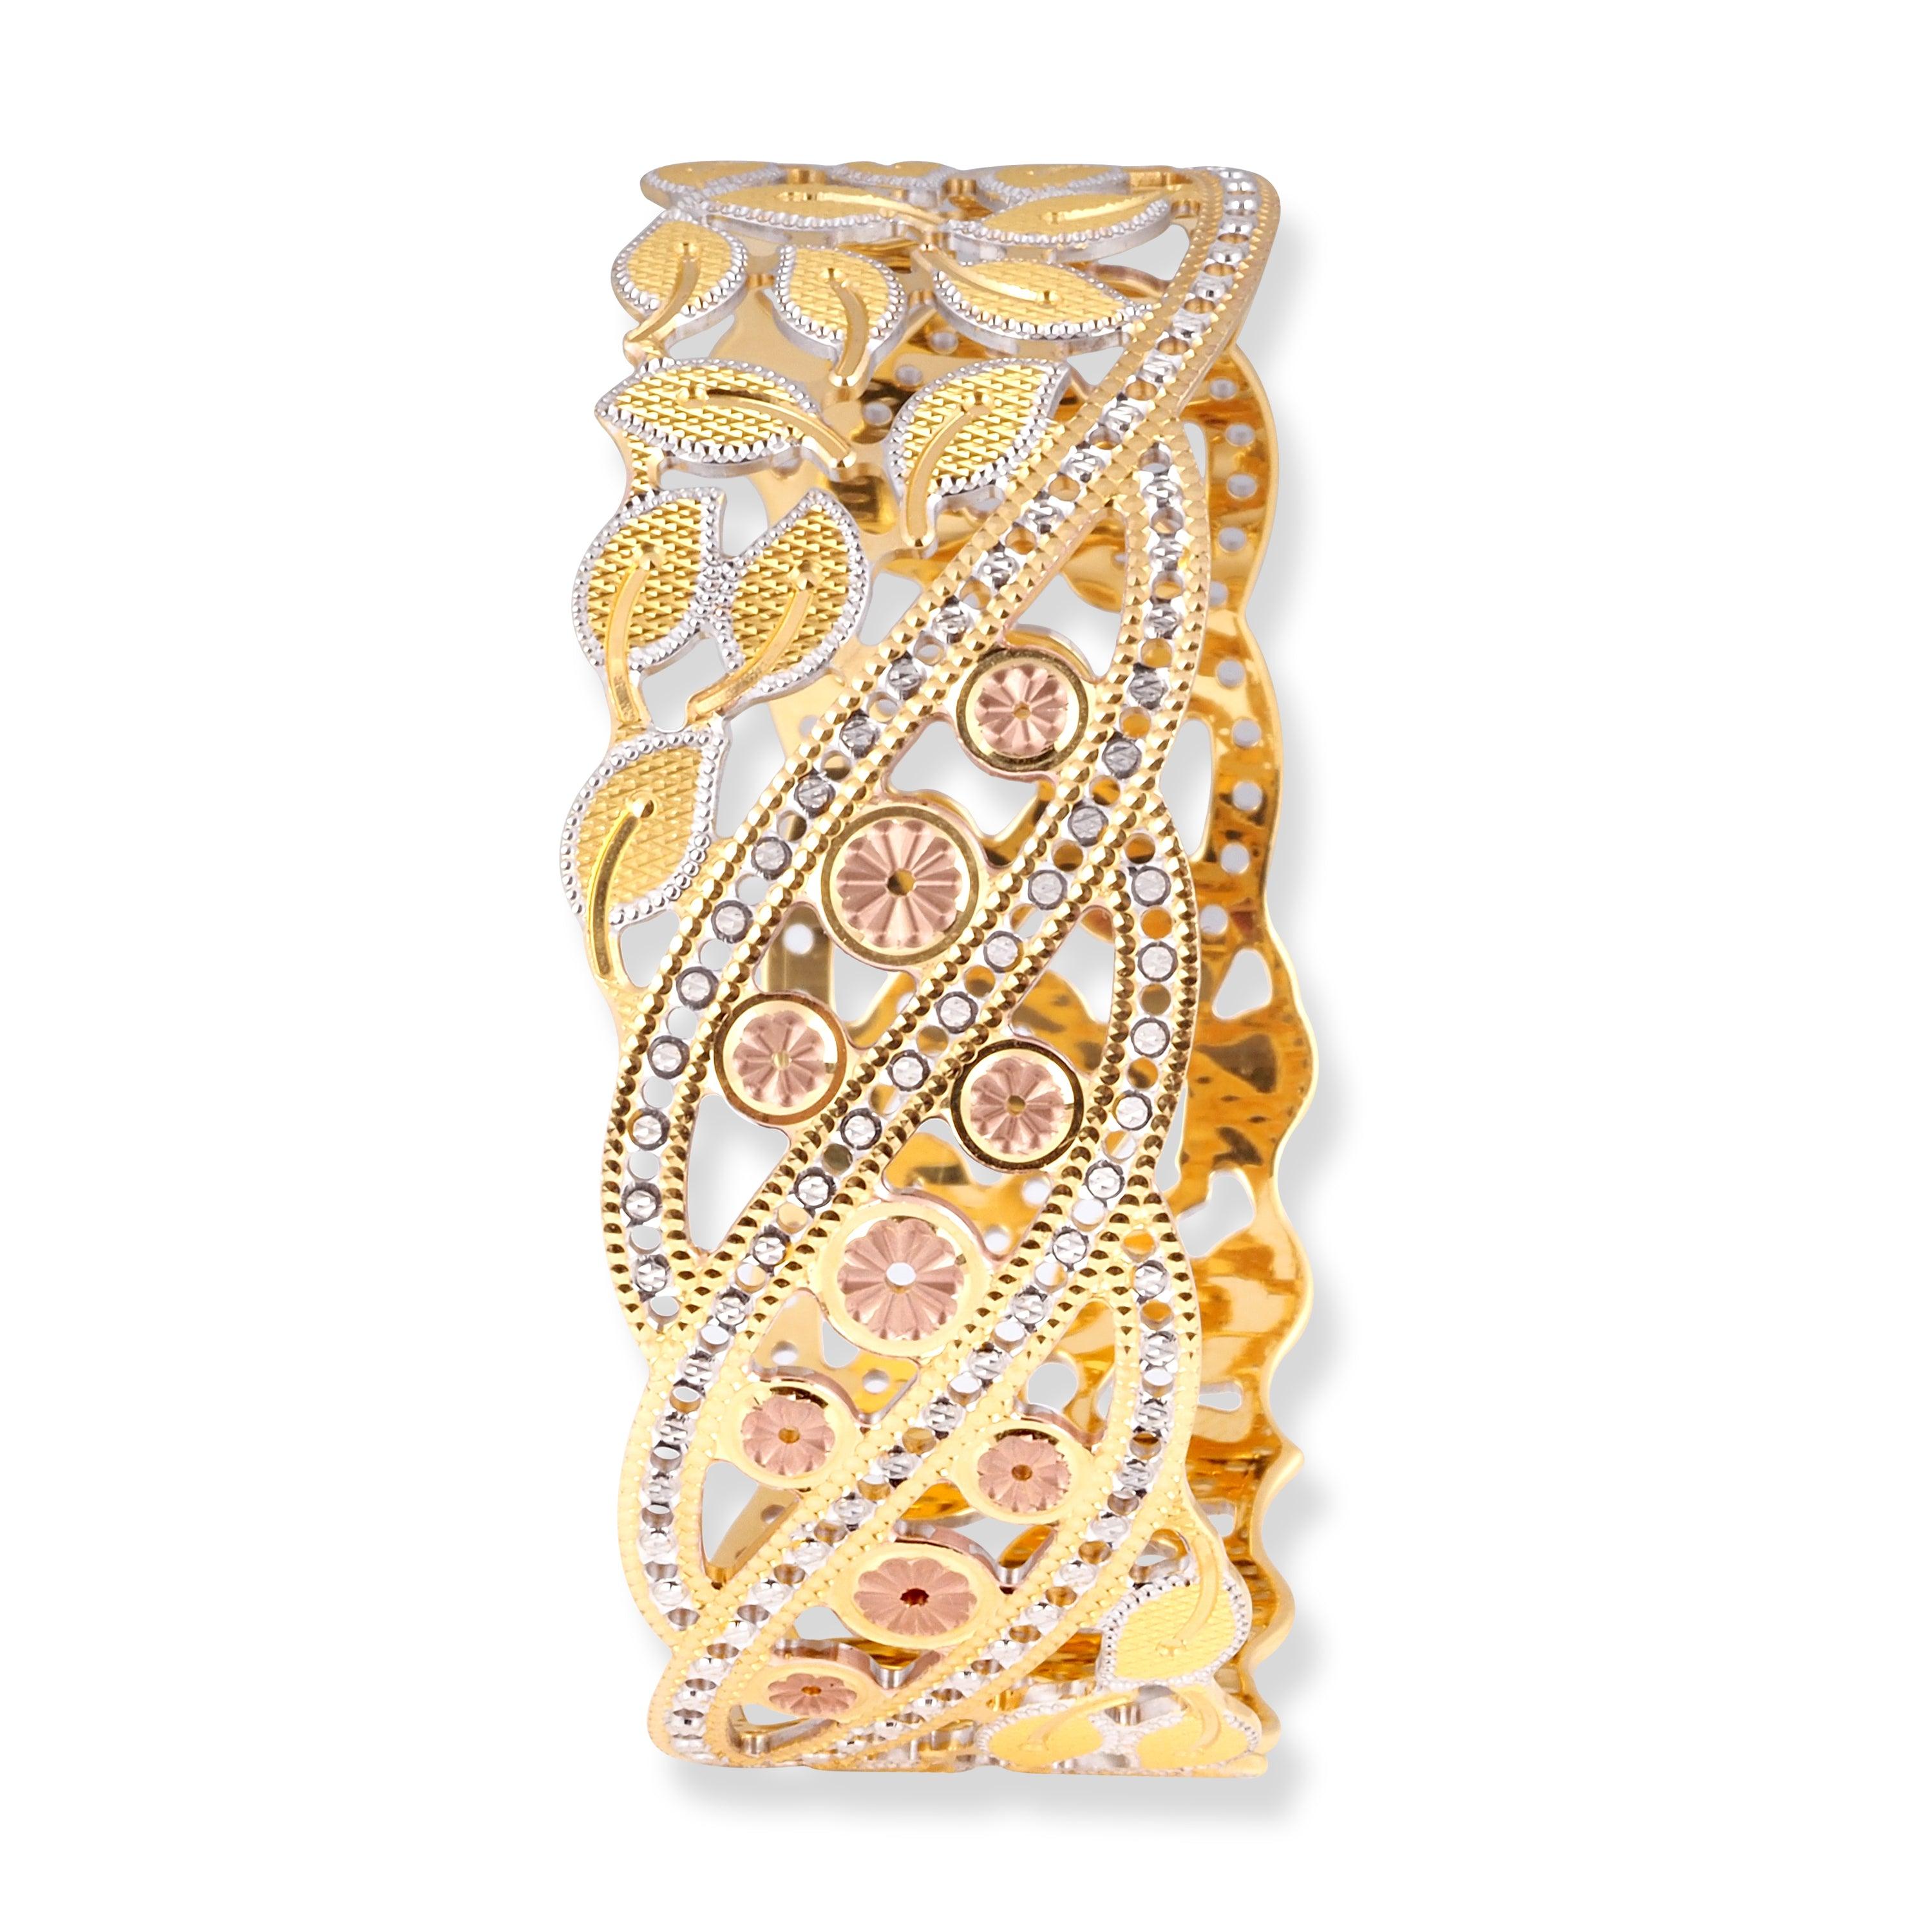 22ct Gold Bangle in Flower Pattern with Rose Gold & White Gold Rhodium Plate Finish B-8560 - Minar Jewellers